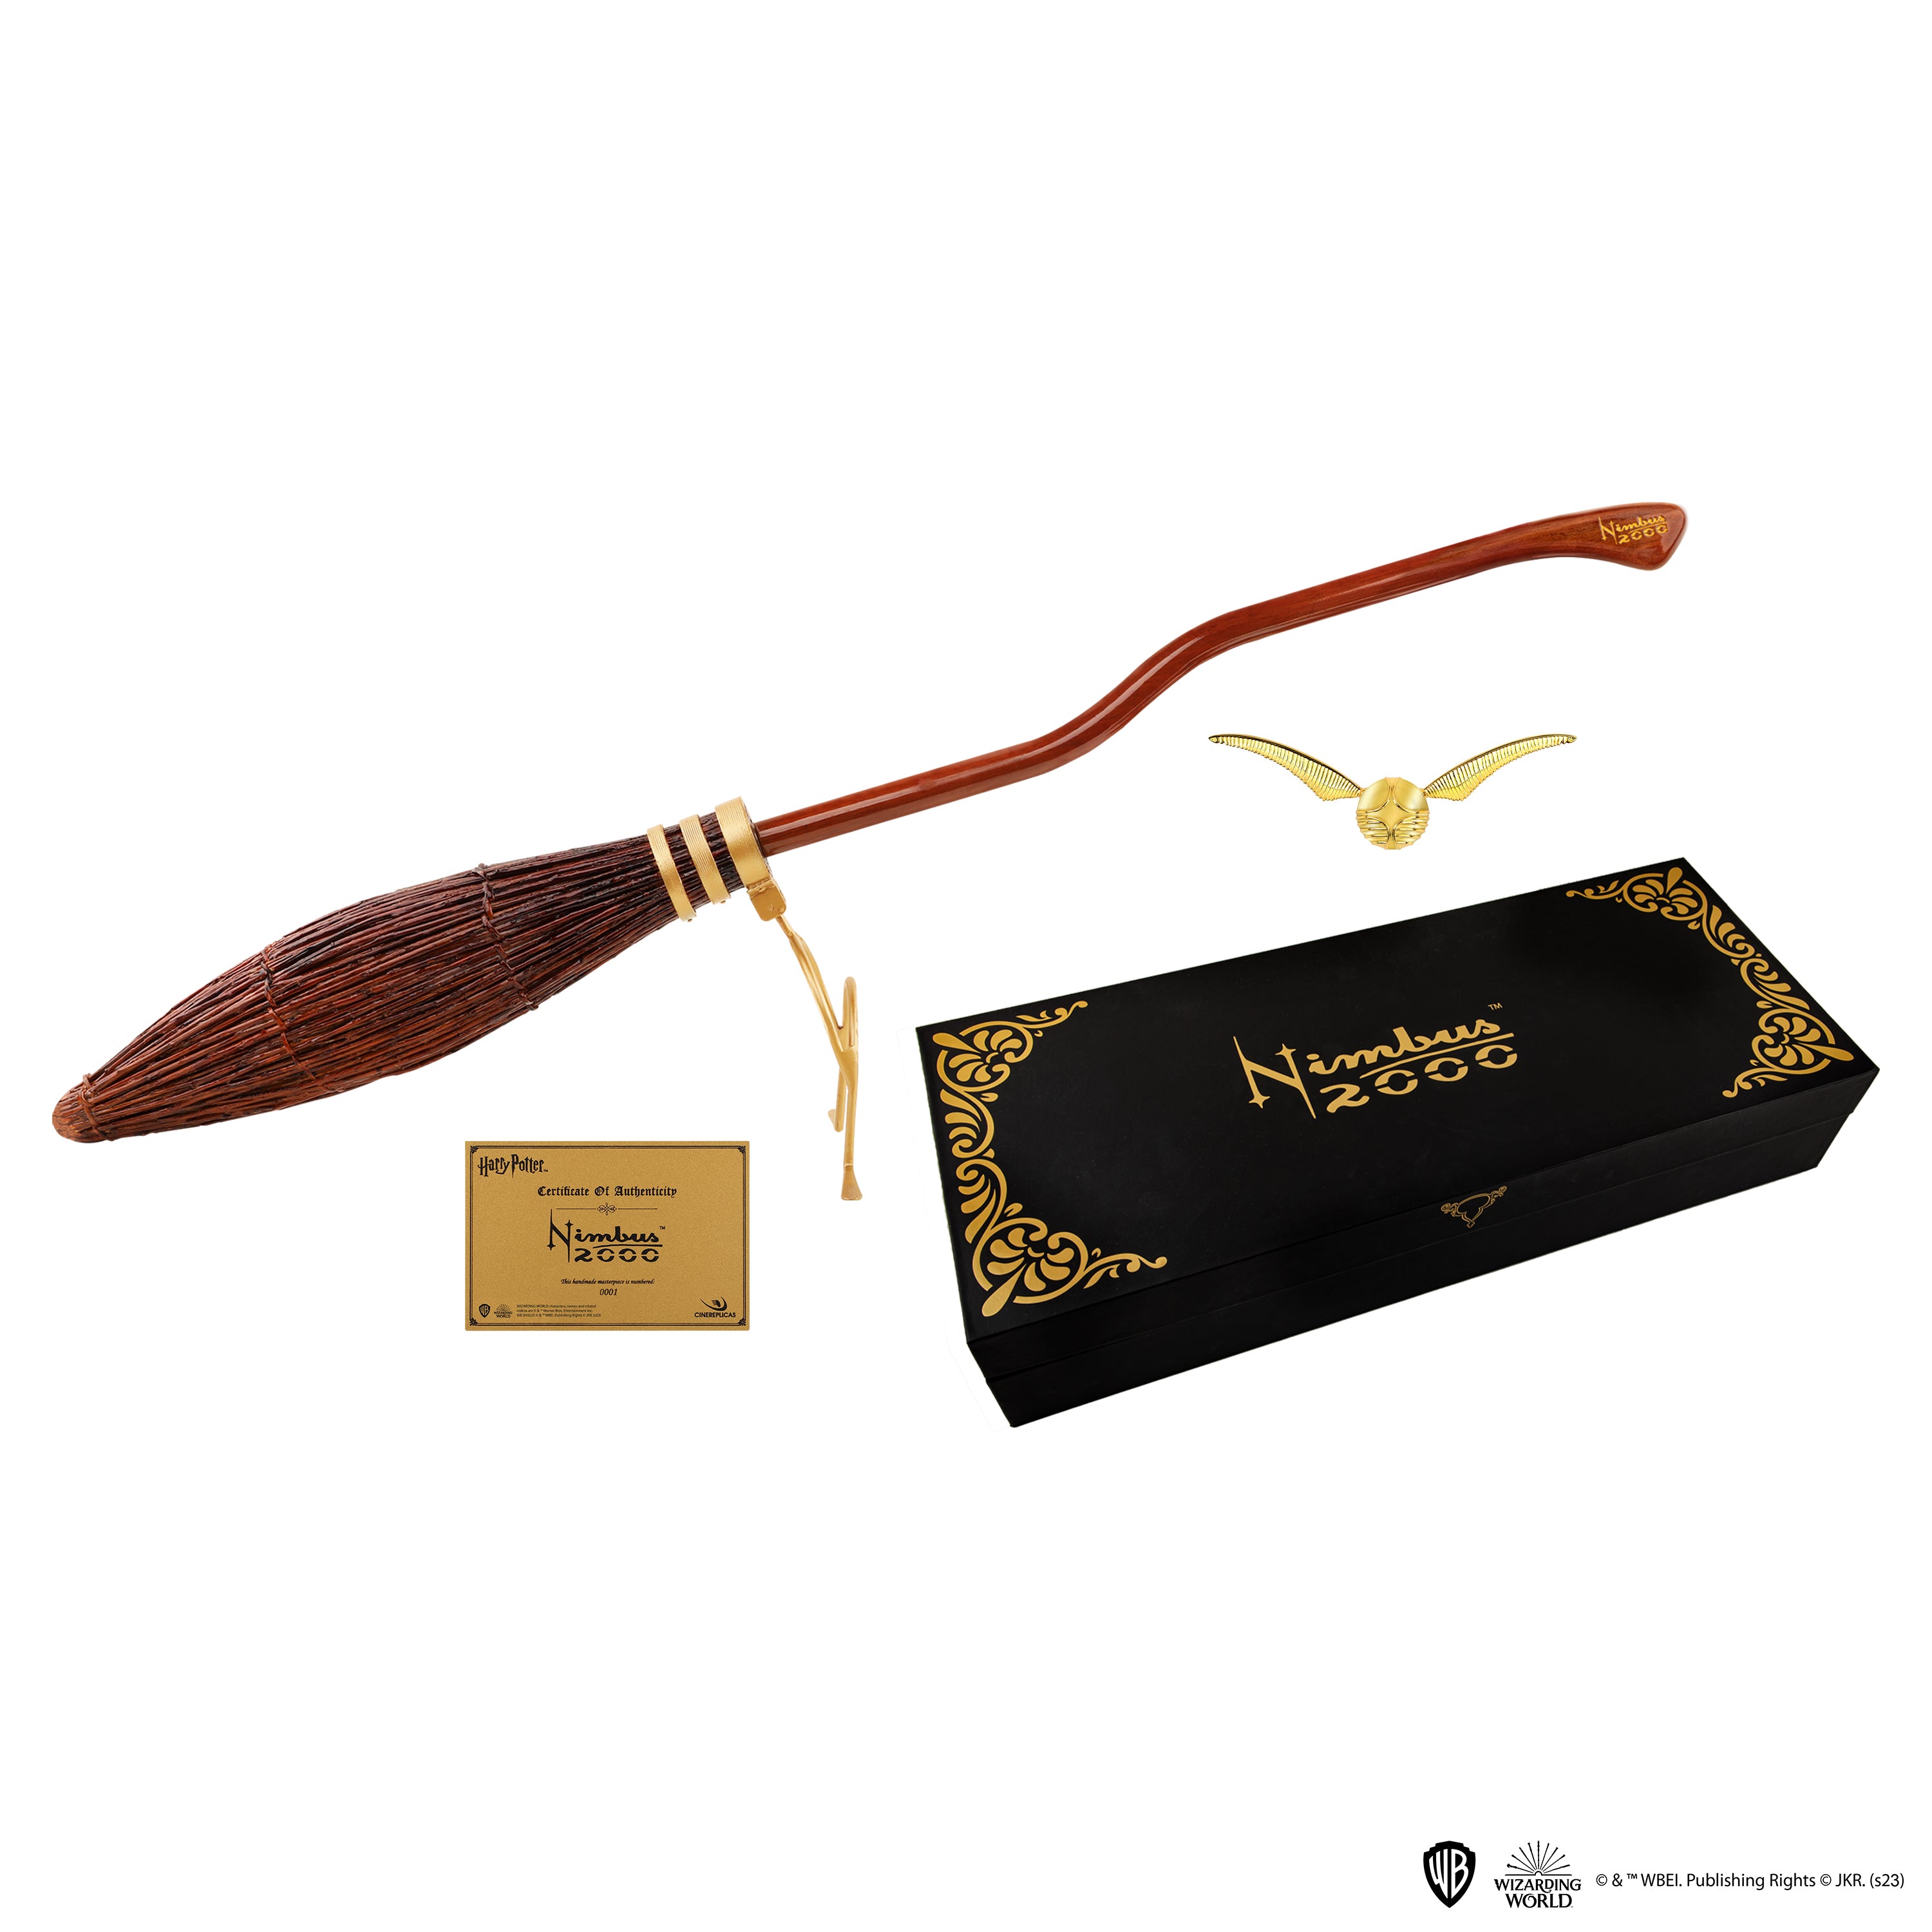 Everything you need to know about our Nimbus 2000 Junior